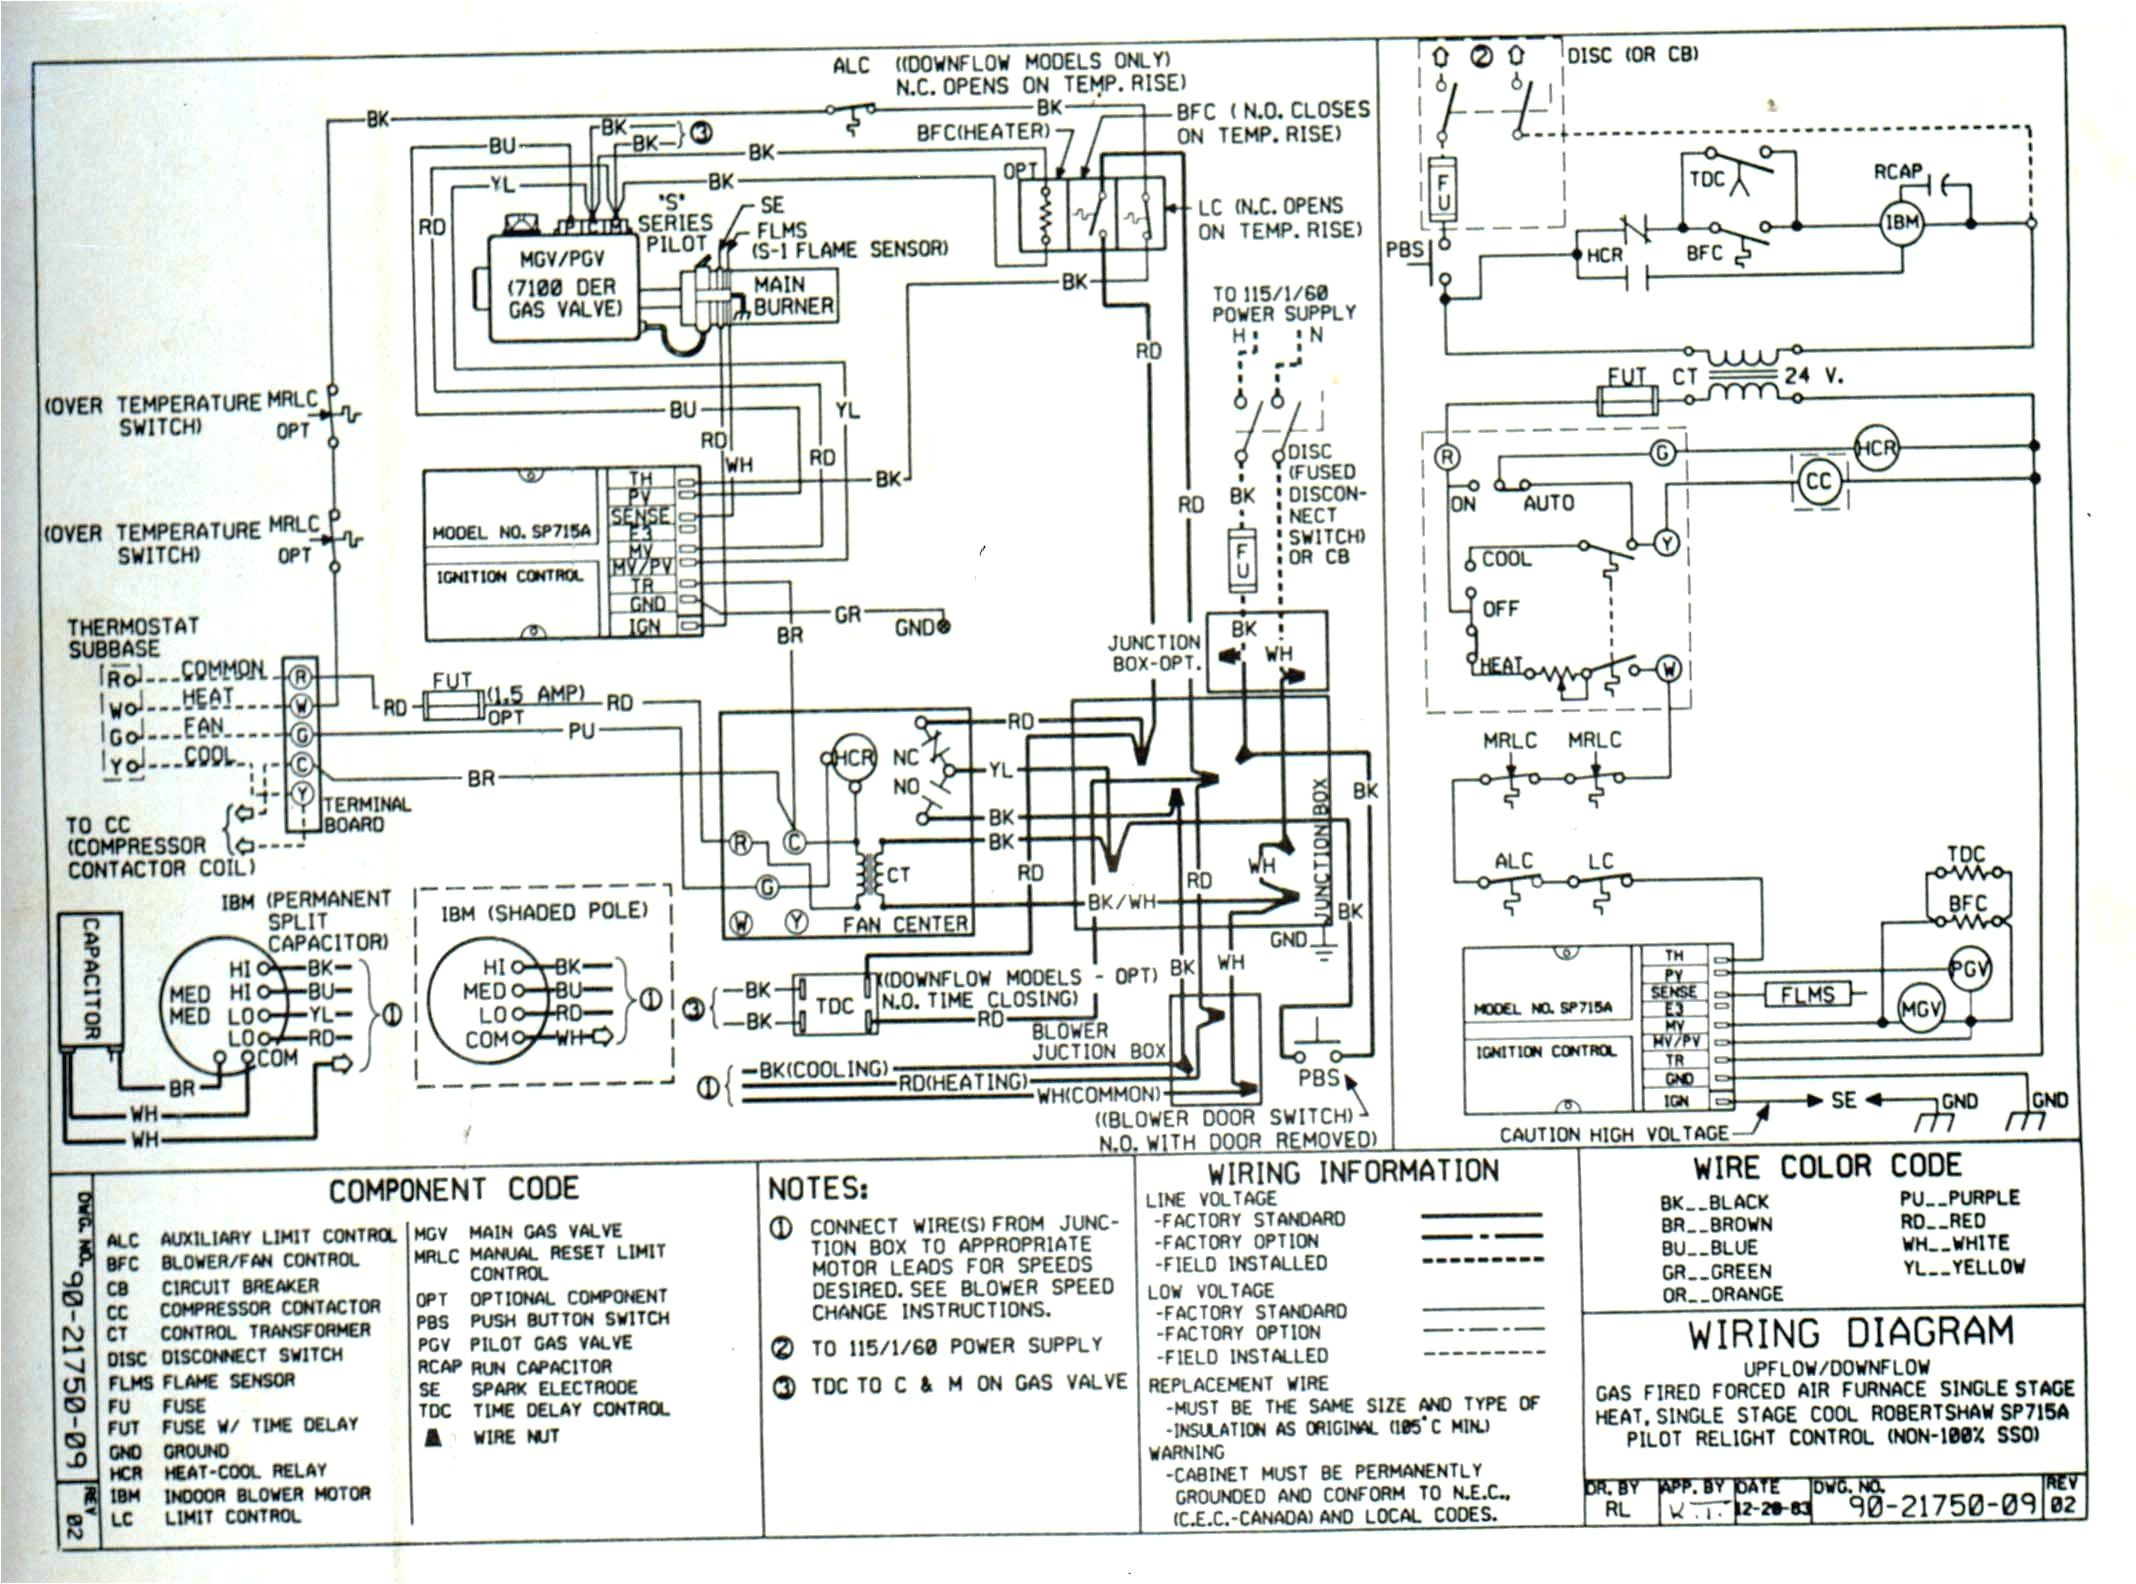 payne wiring diagram schema diagram database wiring diagram further air conditioner electrical wiring on payne